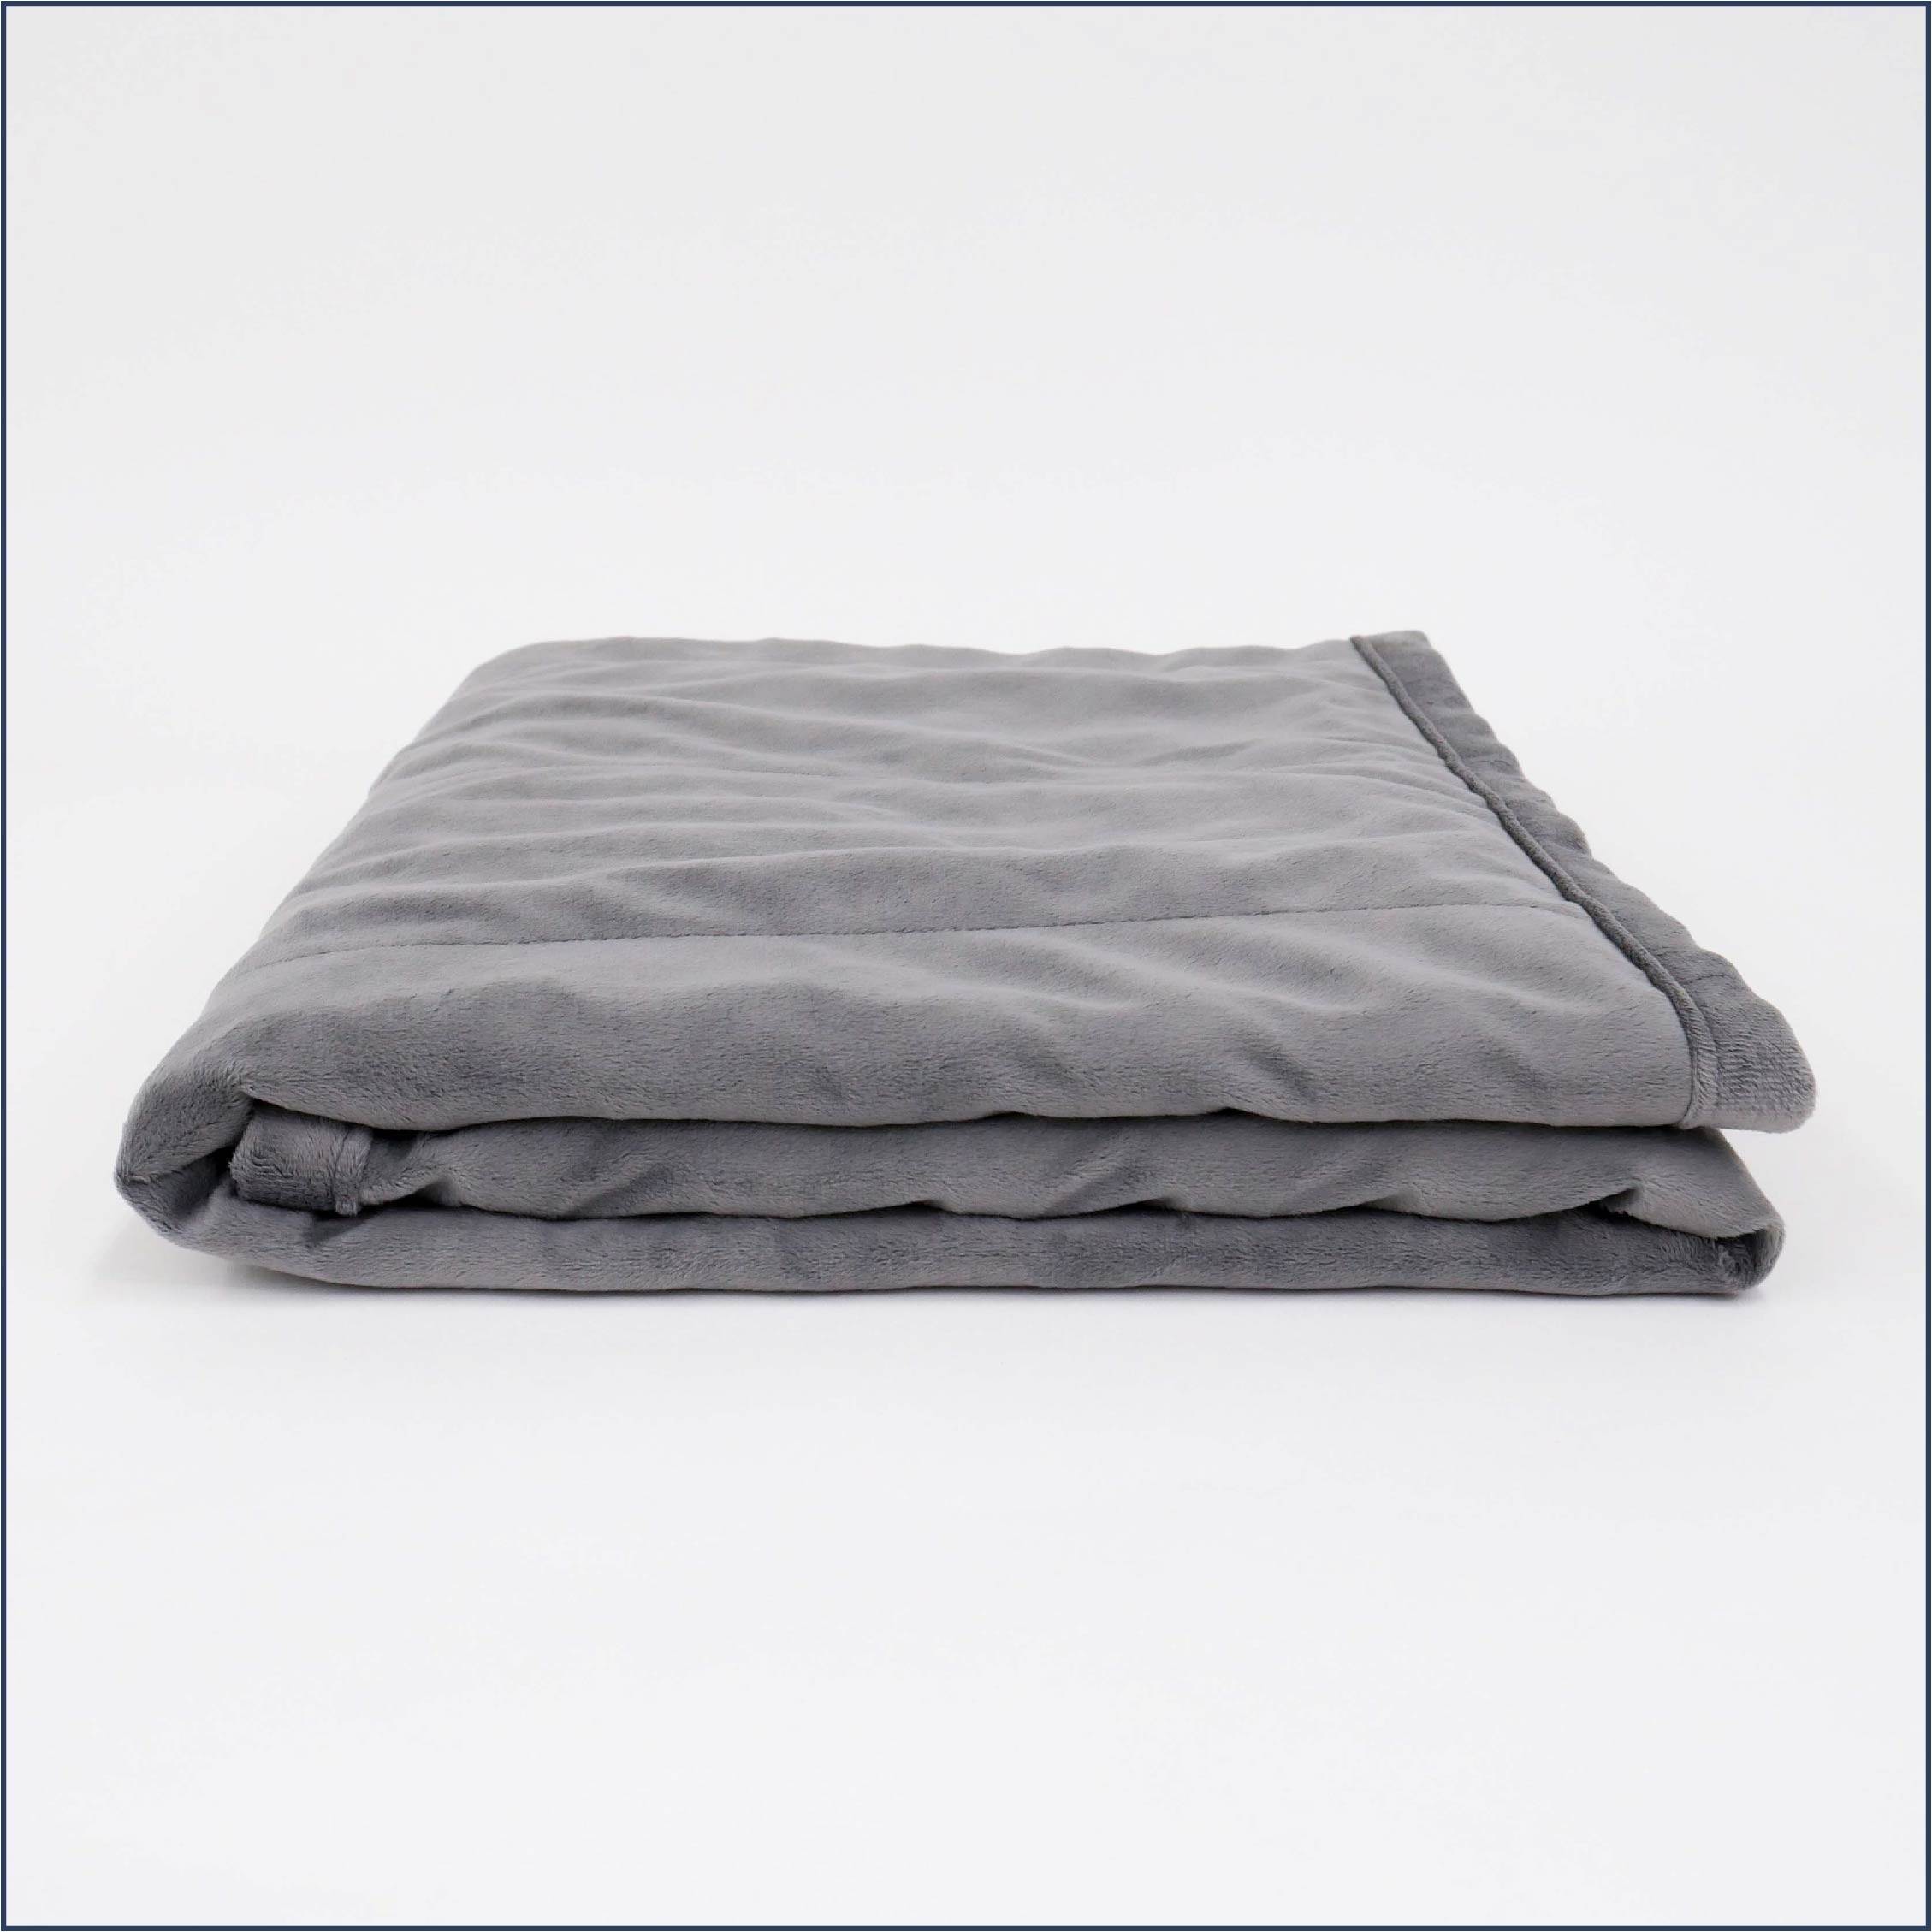 Tuc Kids cool weighted blanket folded.